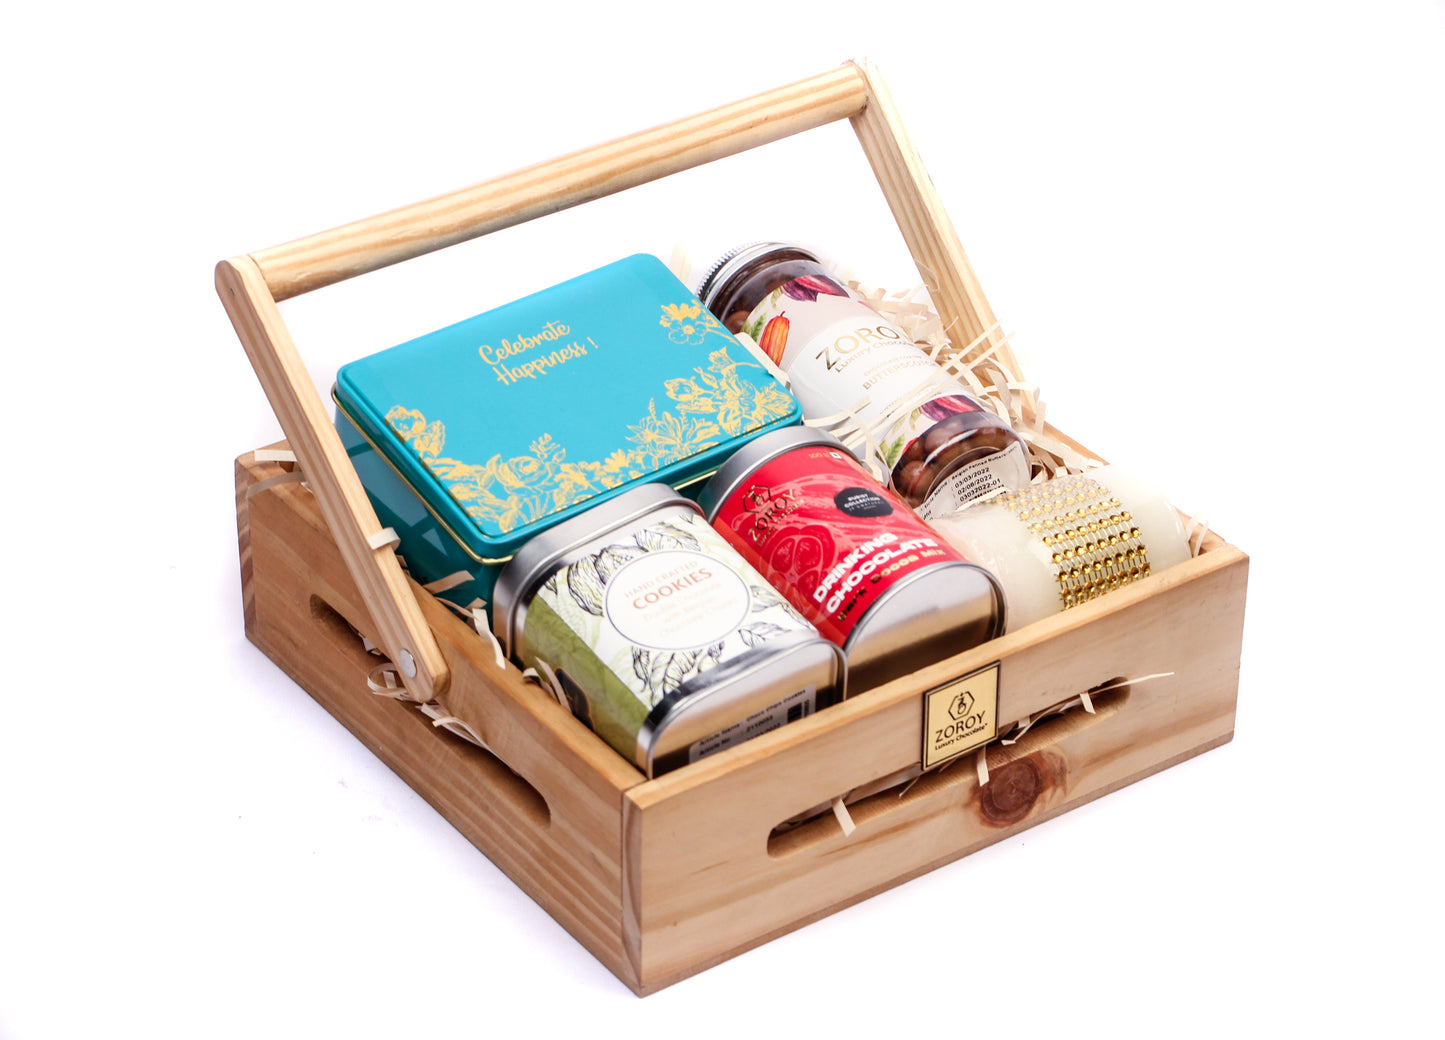 ZOROY LUXURY CHOCOLATE Wooden Hamper Basket Large | Box of chocolate cookies biscuits 16nos | 200G Premium drinking chocolate | 100G Premium Handcrafted cookies | 200G Pure chocolate coated nuts | Studded candle